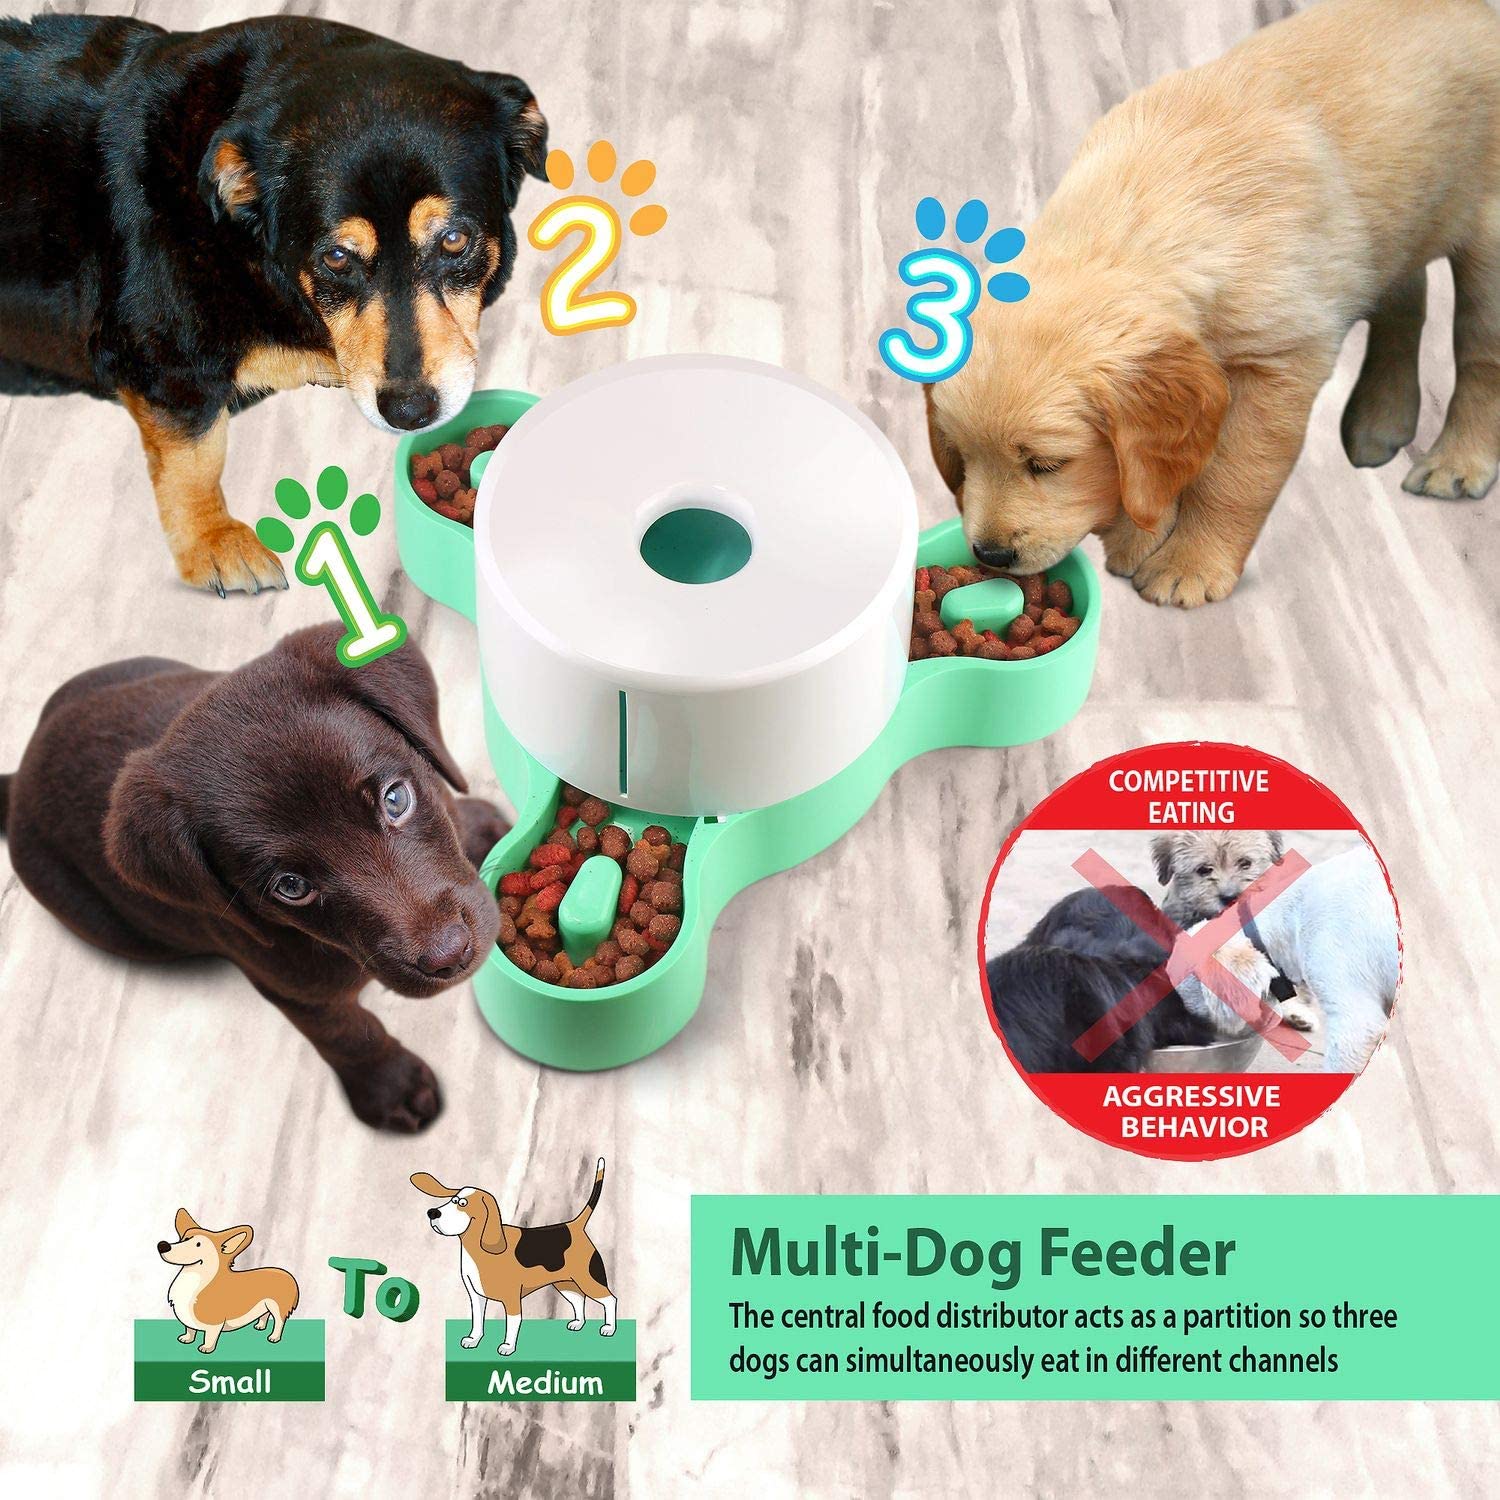 Zig-Zag Slow Feeder for Dogs & Cats